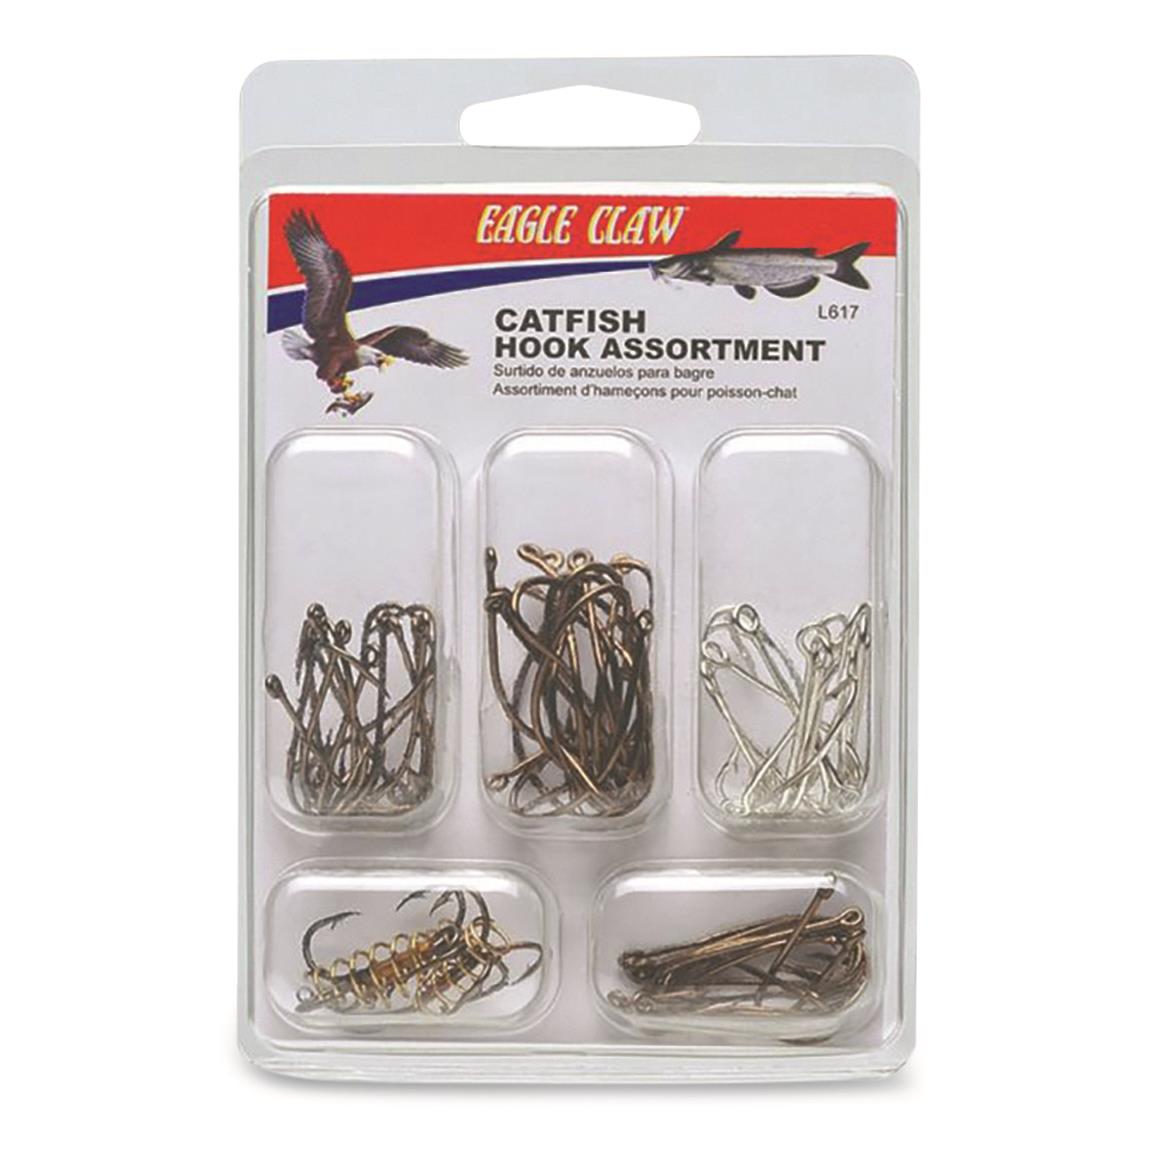 Eagle Claw Catfish Hook Kit, 67 Pieces